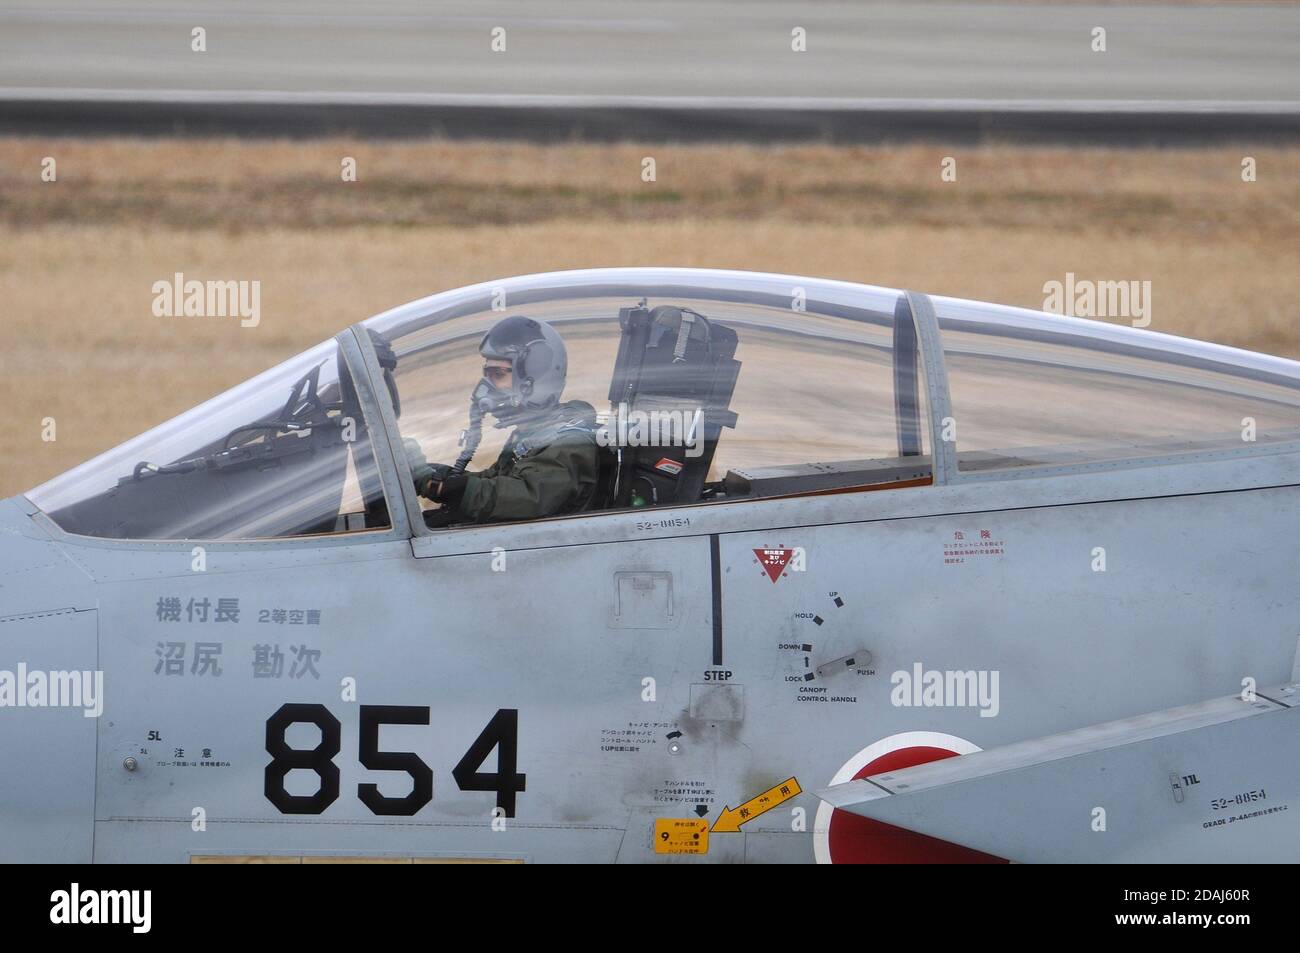 McDONNELL-DOUGLAS F-15J EAGLE OF THE 305 SQUADRON JAPANESE AIR SELF-DEFENSE FORCE (JASDF). Stock Photo